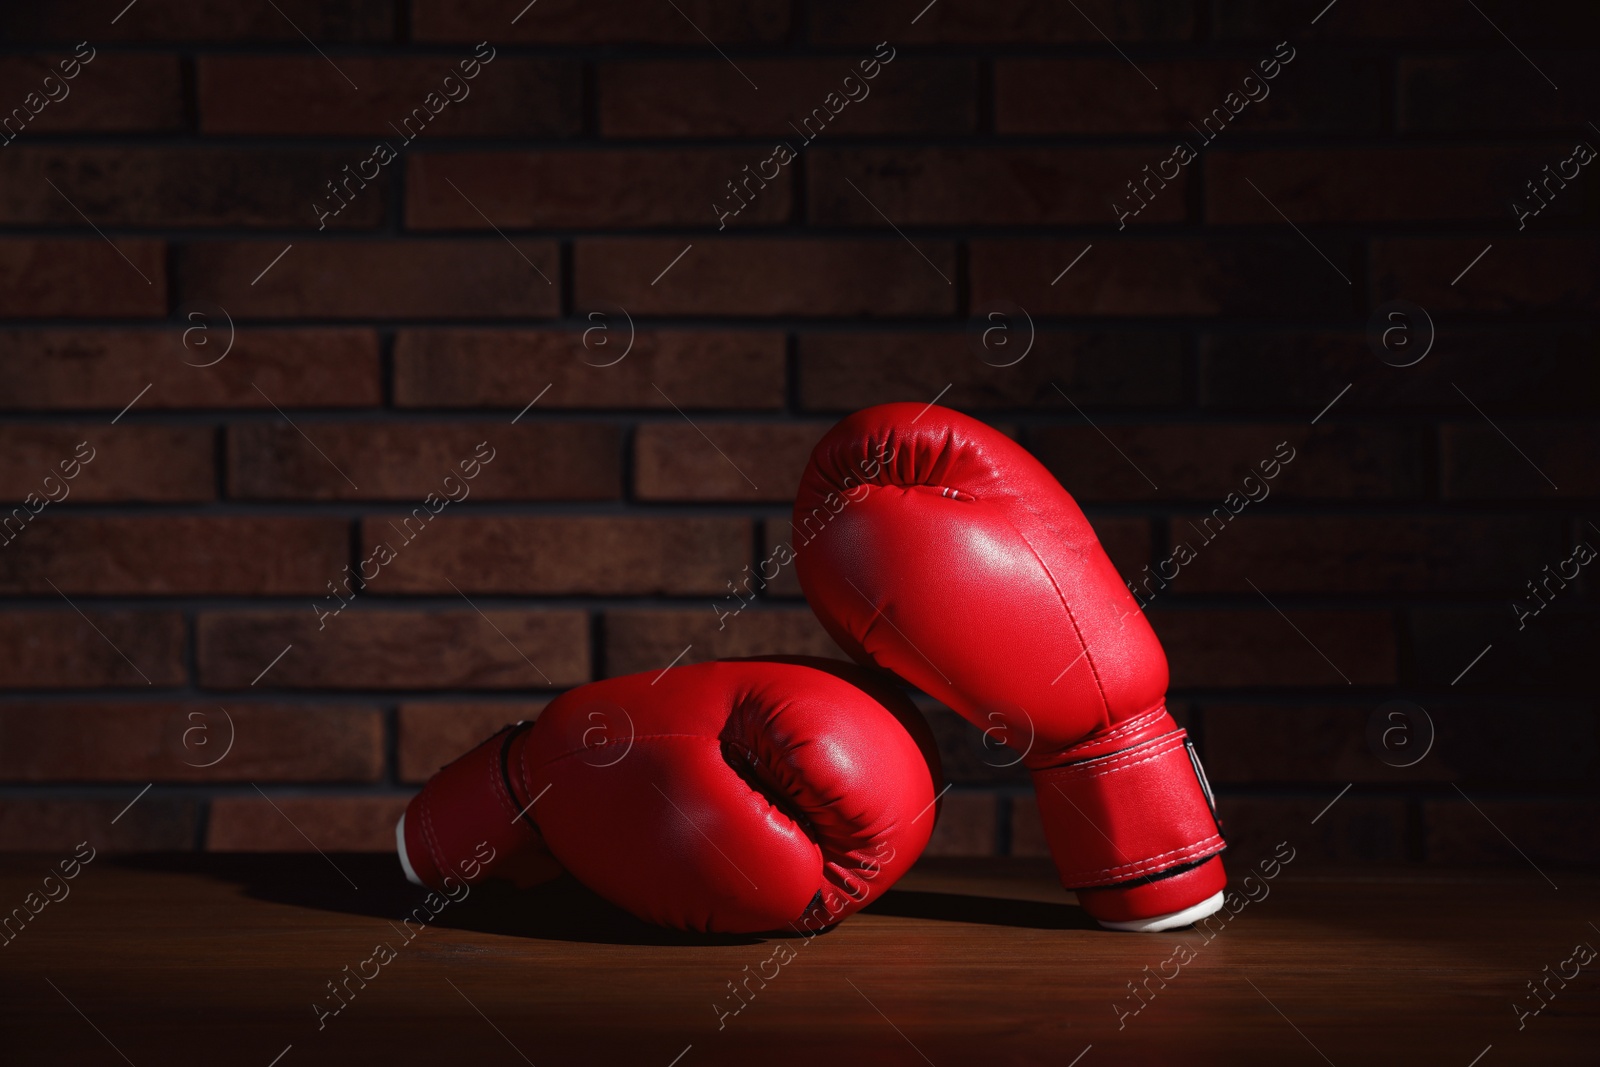 Photo of Pair of red boxing gloves on wooden table near brick wall